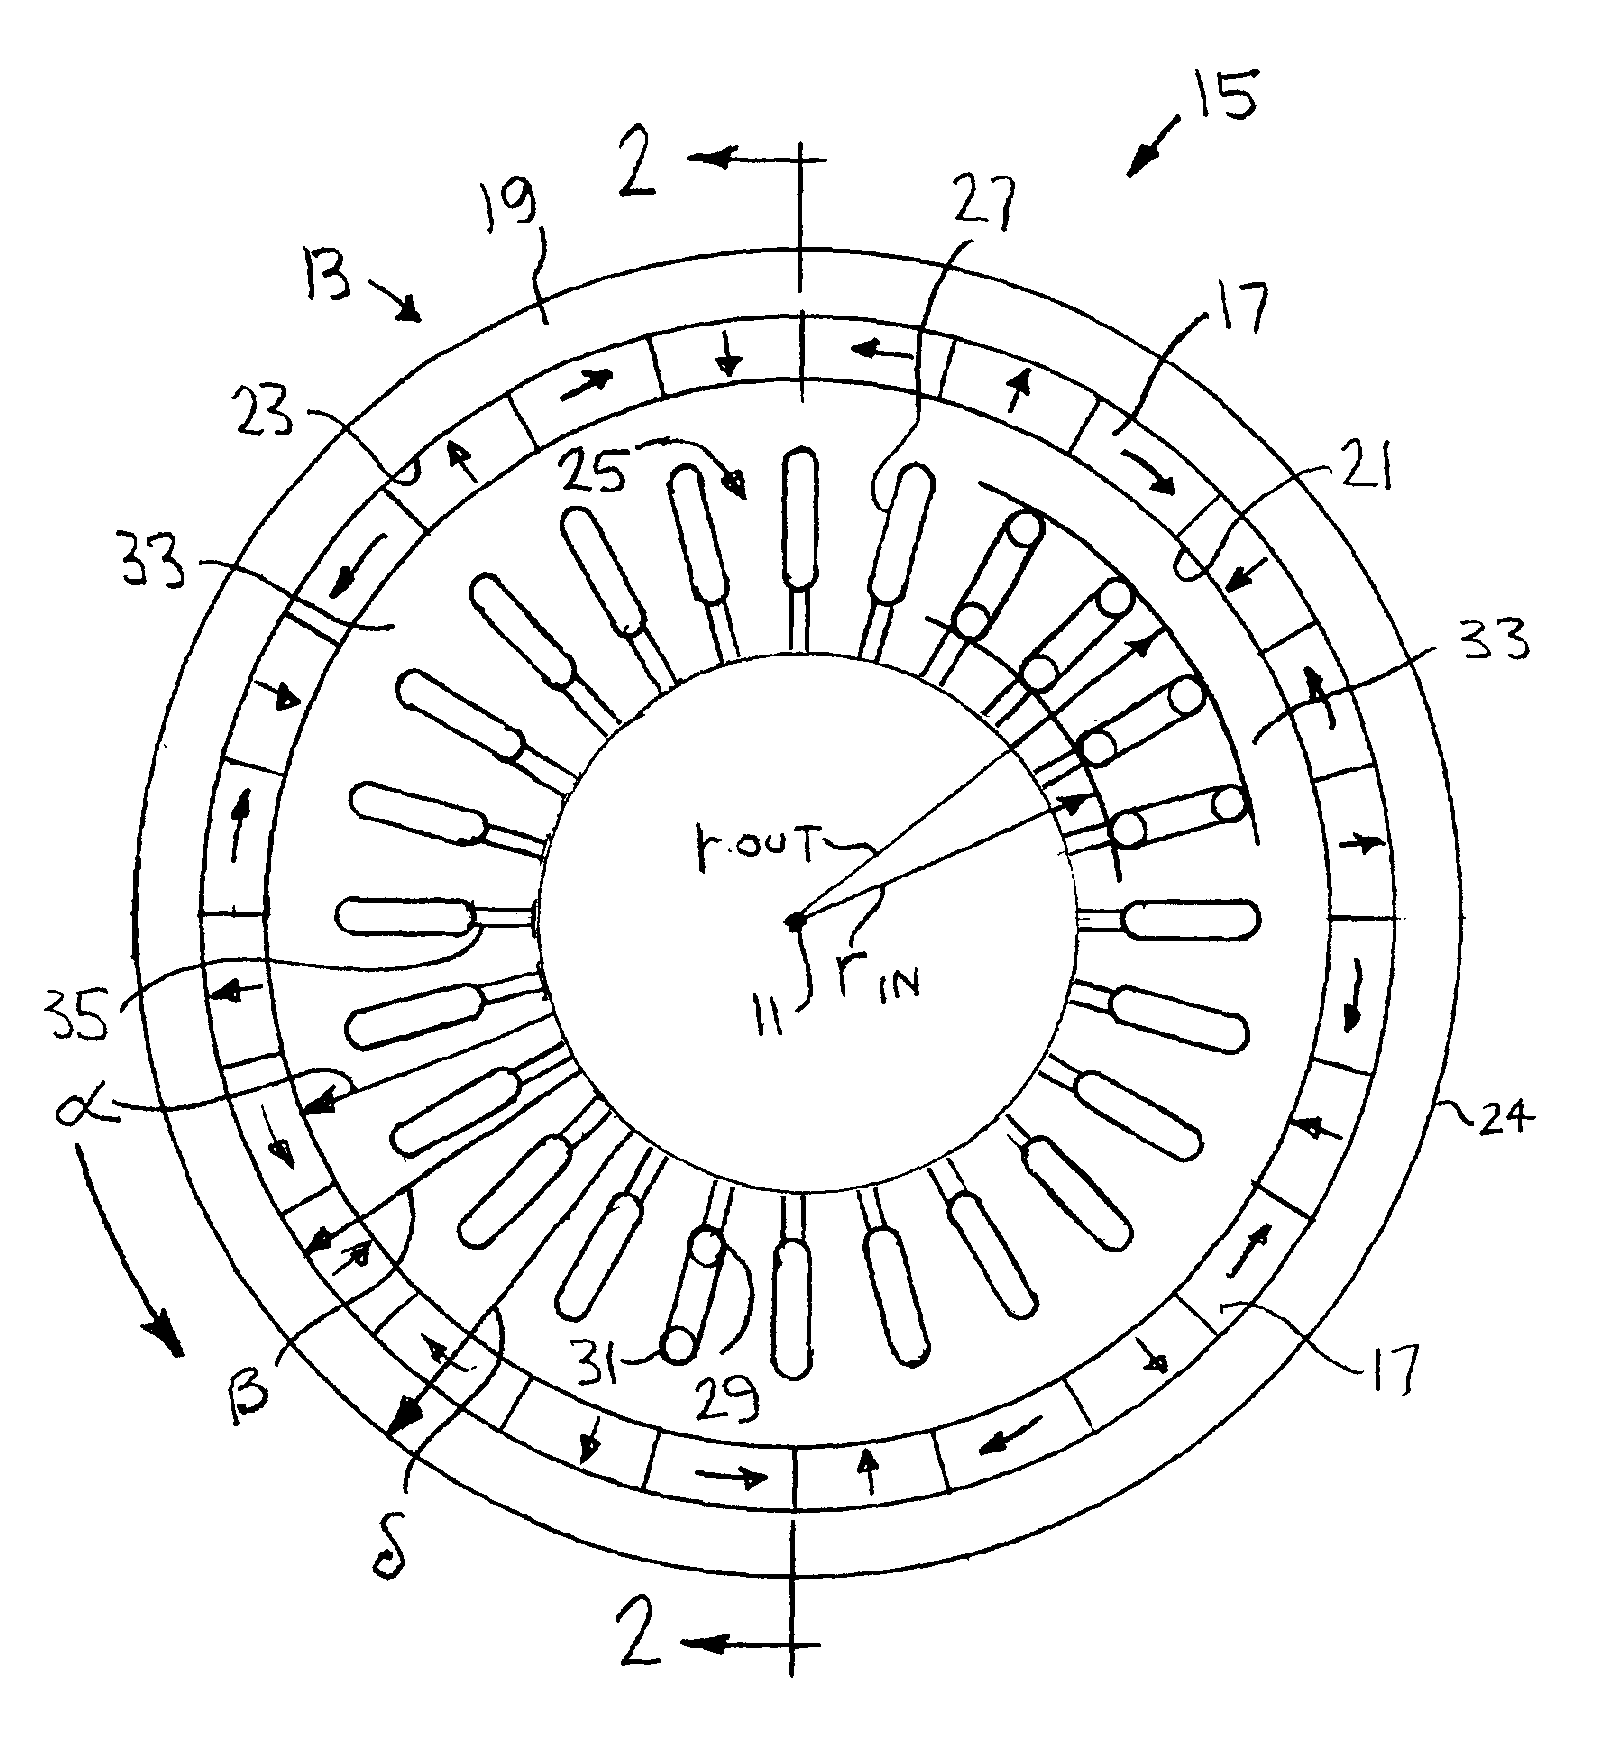 Halbach array generator/motor having an automatically regulated output voltage and mechanical power output